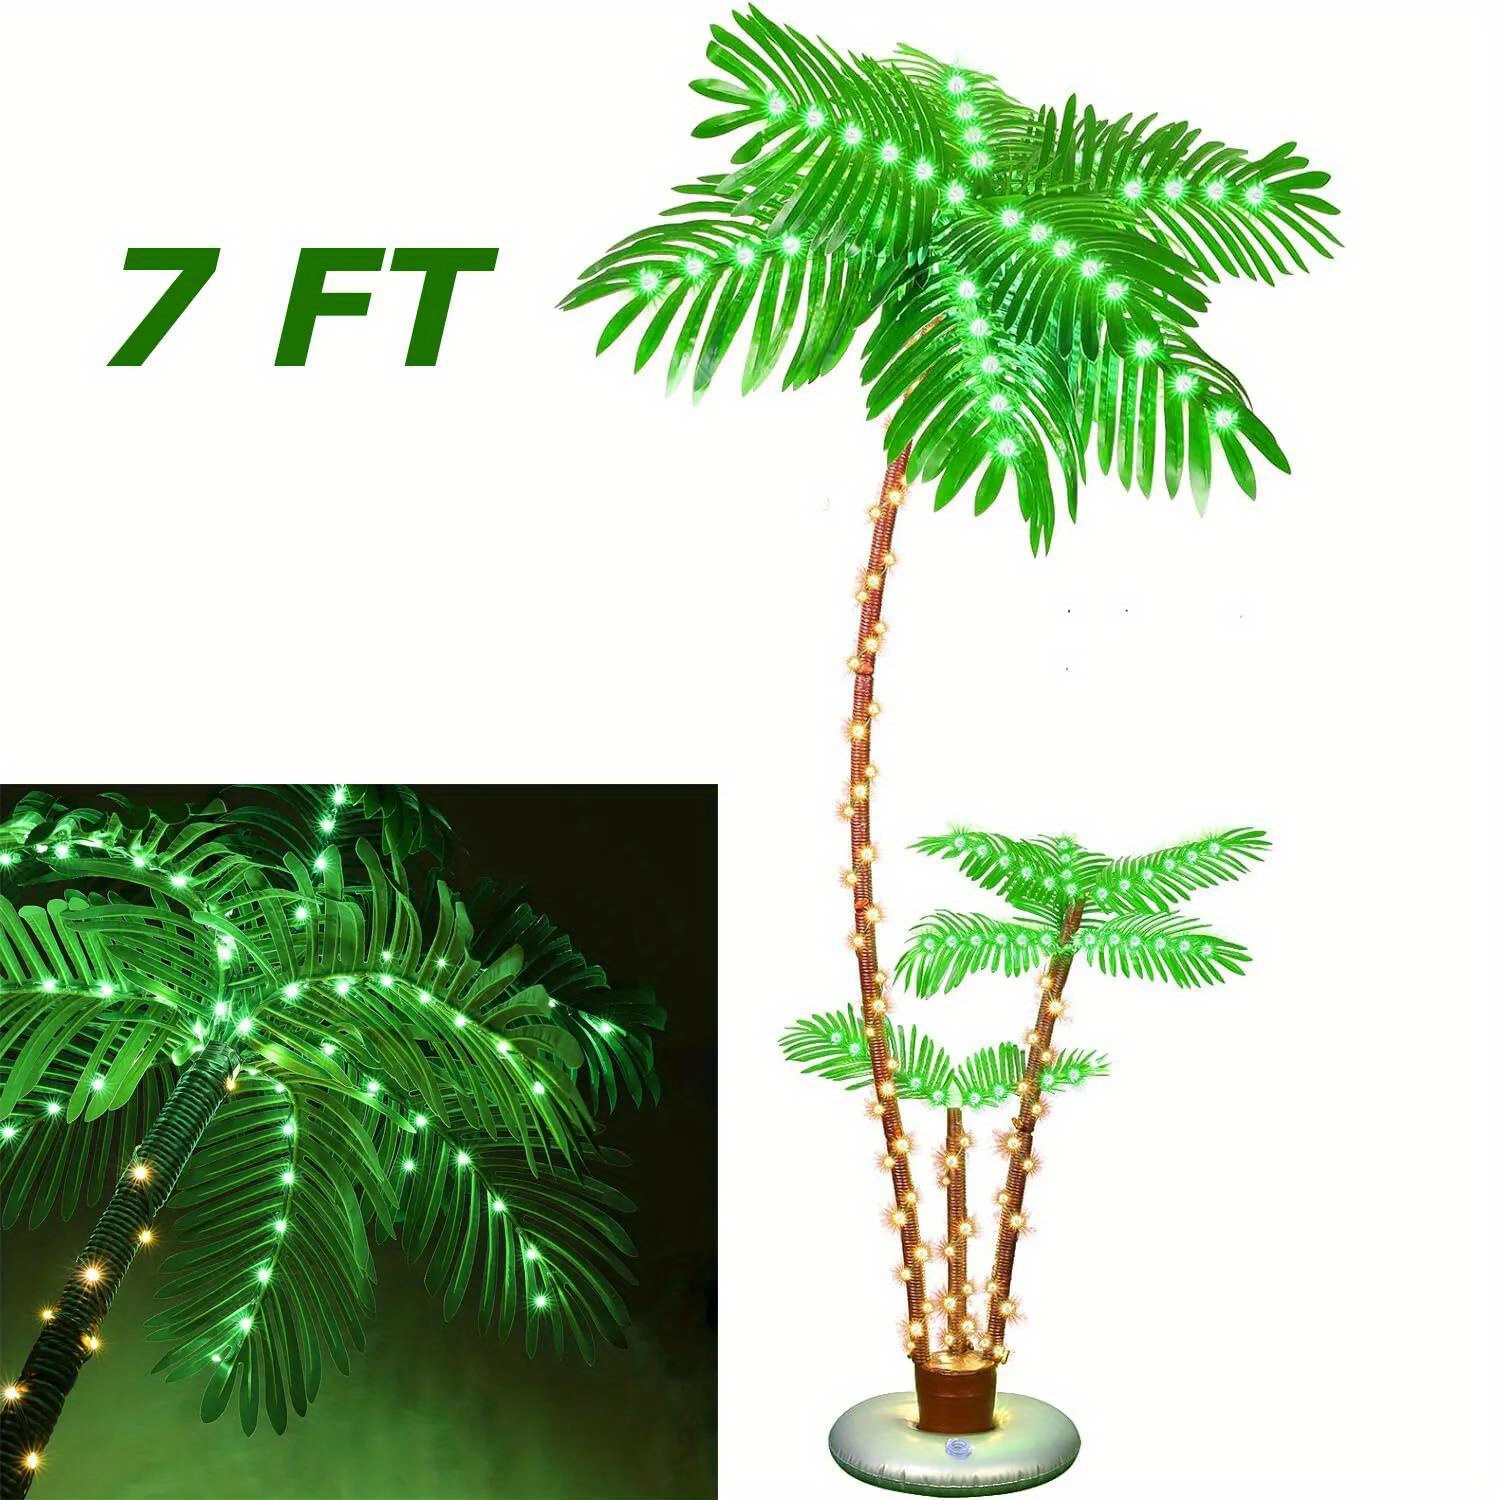 

7ft Lighted Palm Trees For Outside Patio, Artificial Palm Trees Lights For Outdoors, Light Up Tropical Palm Tree Indoor For Pool Beach Yard Summer Party Home Hawaiian Bar Decorations